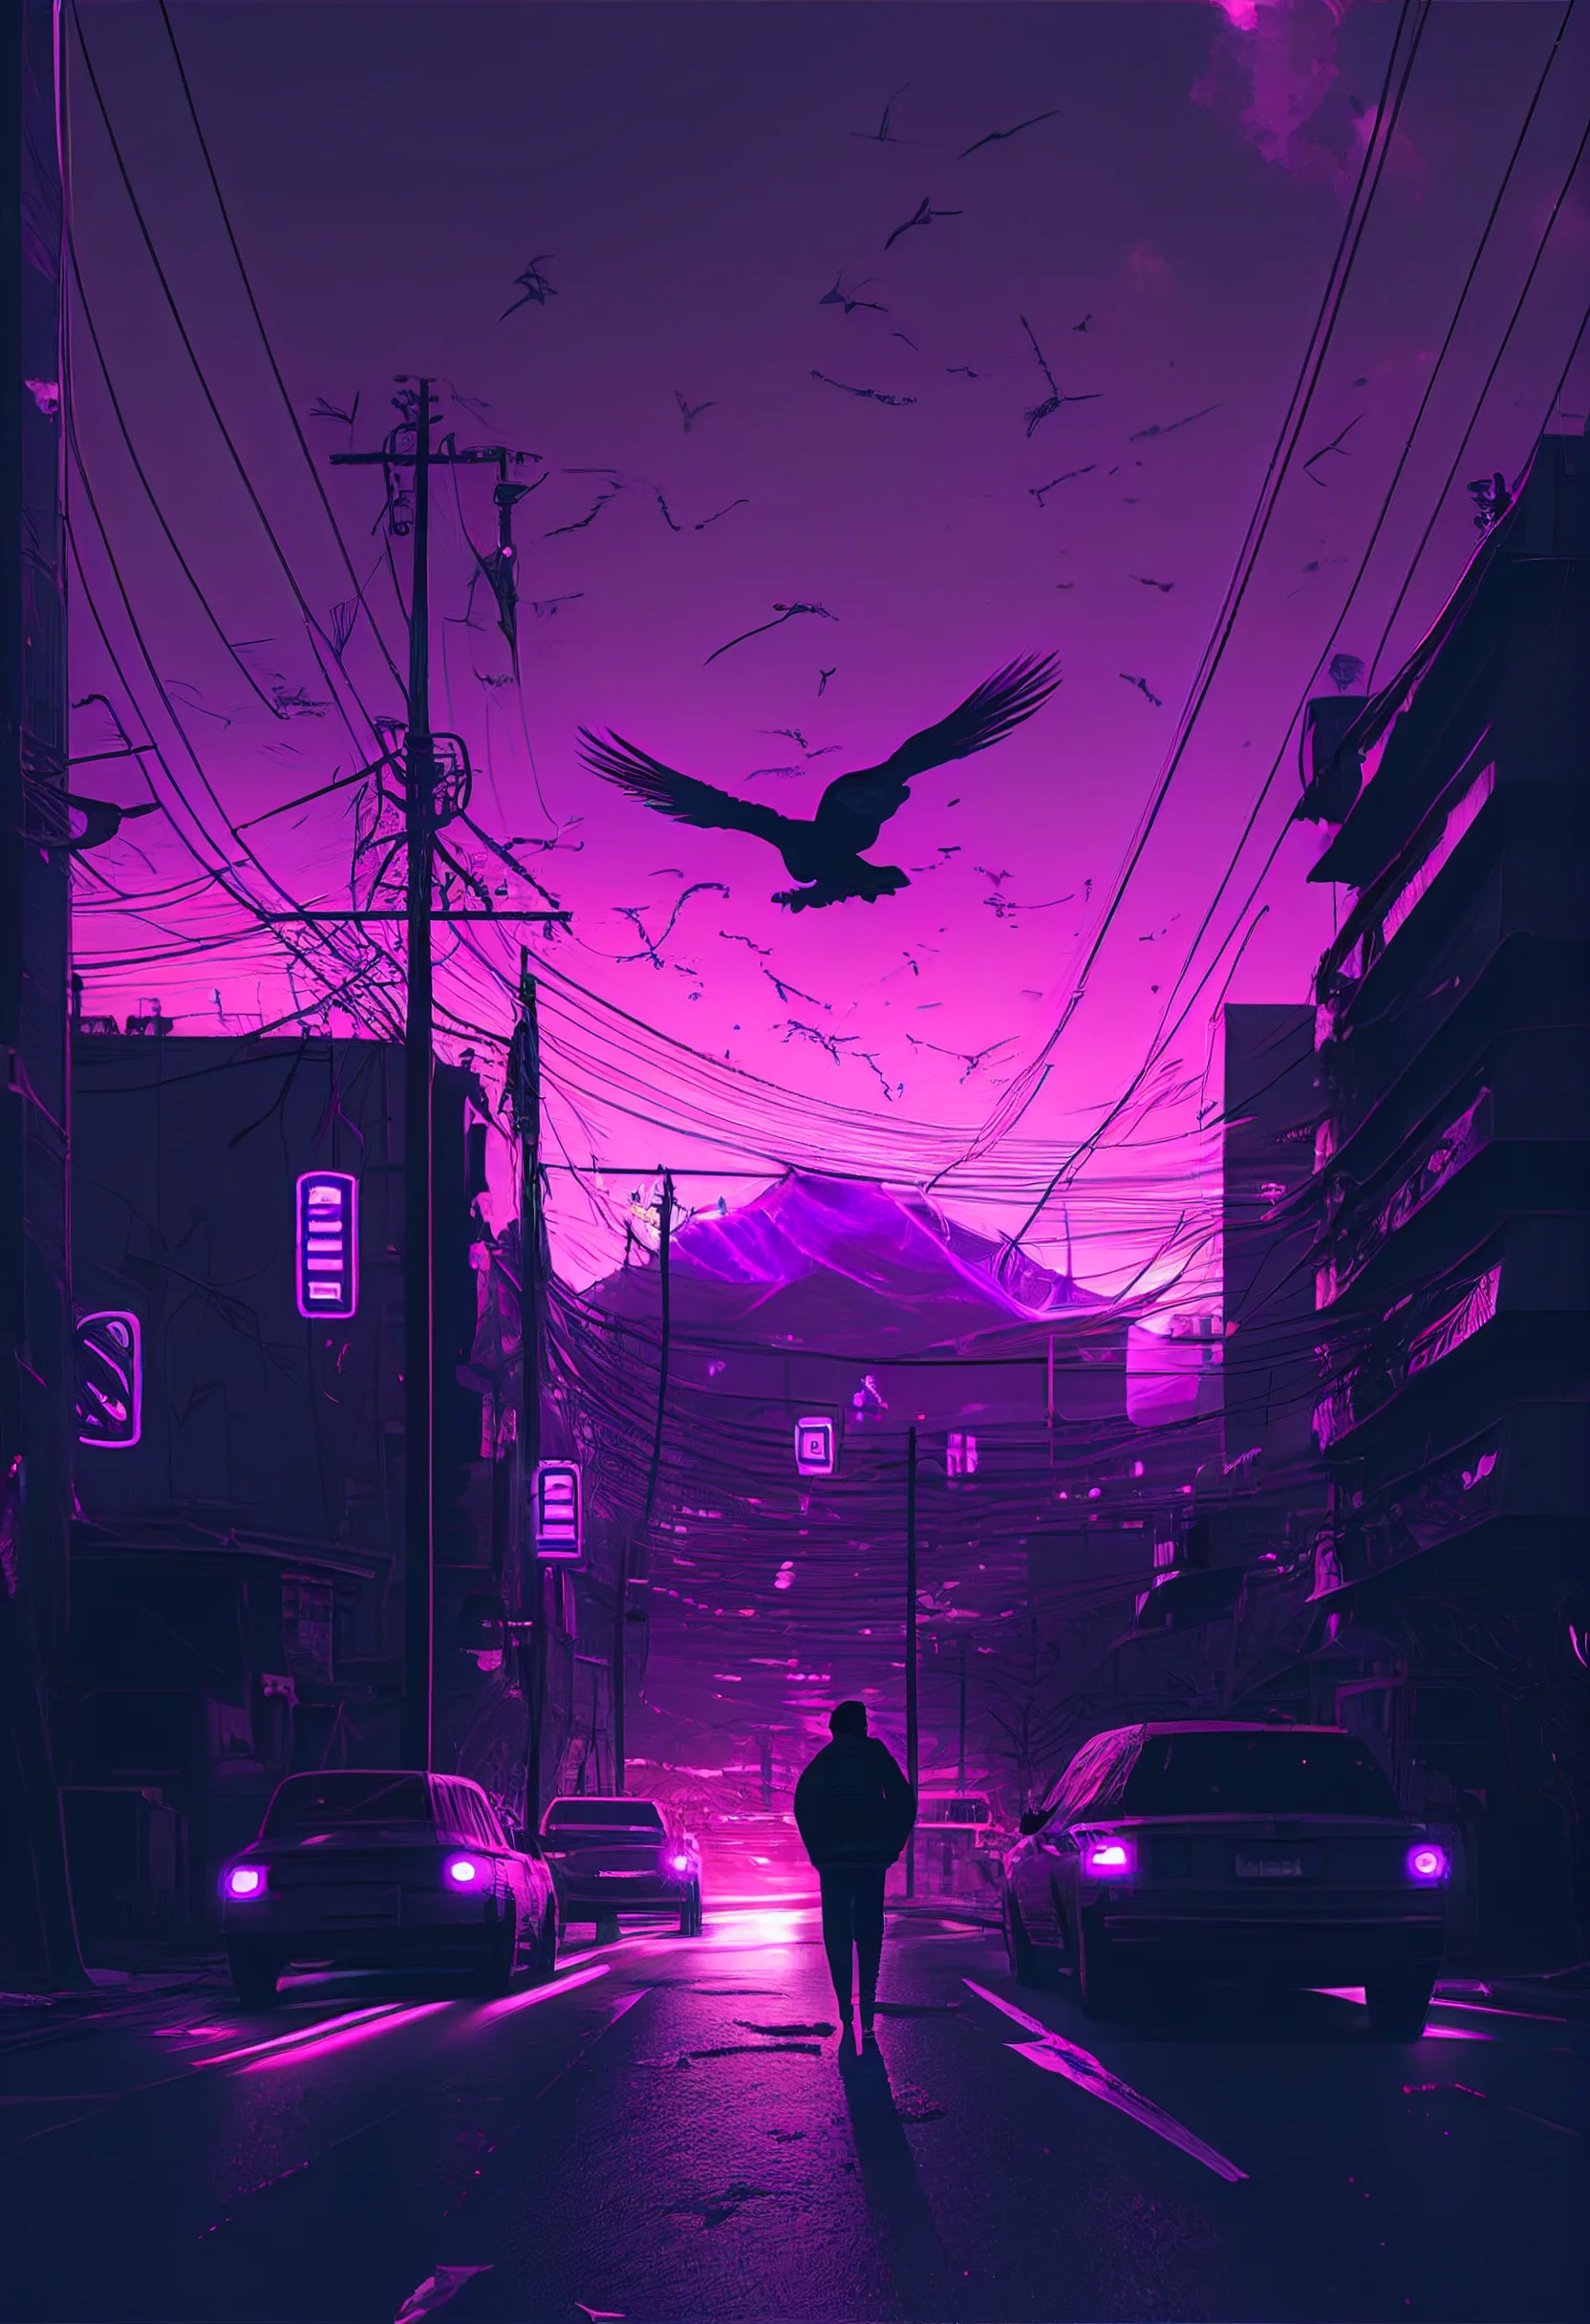 A person walking down a street at night with a purple sky - Light purple